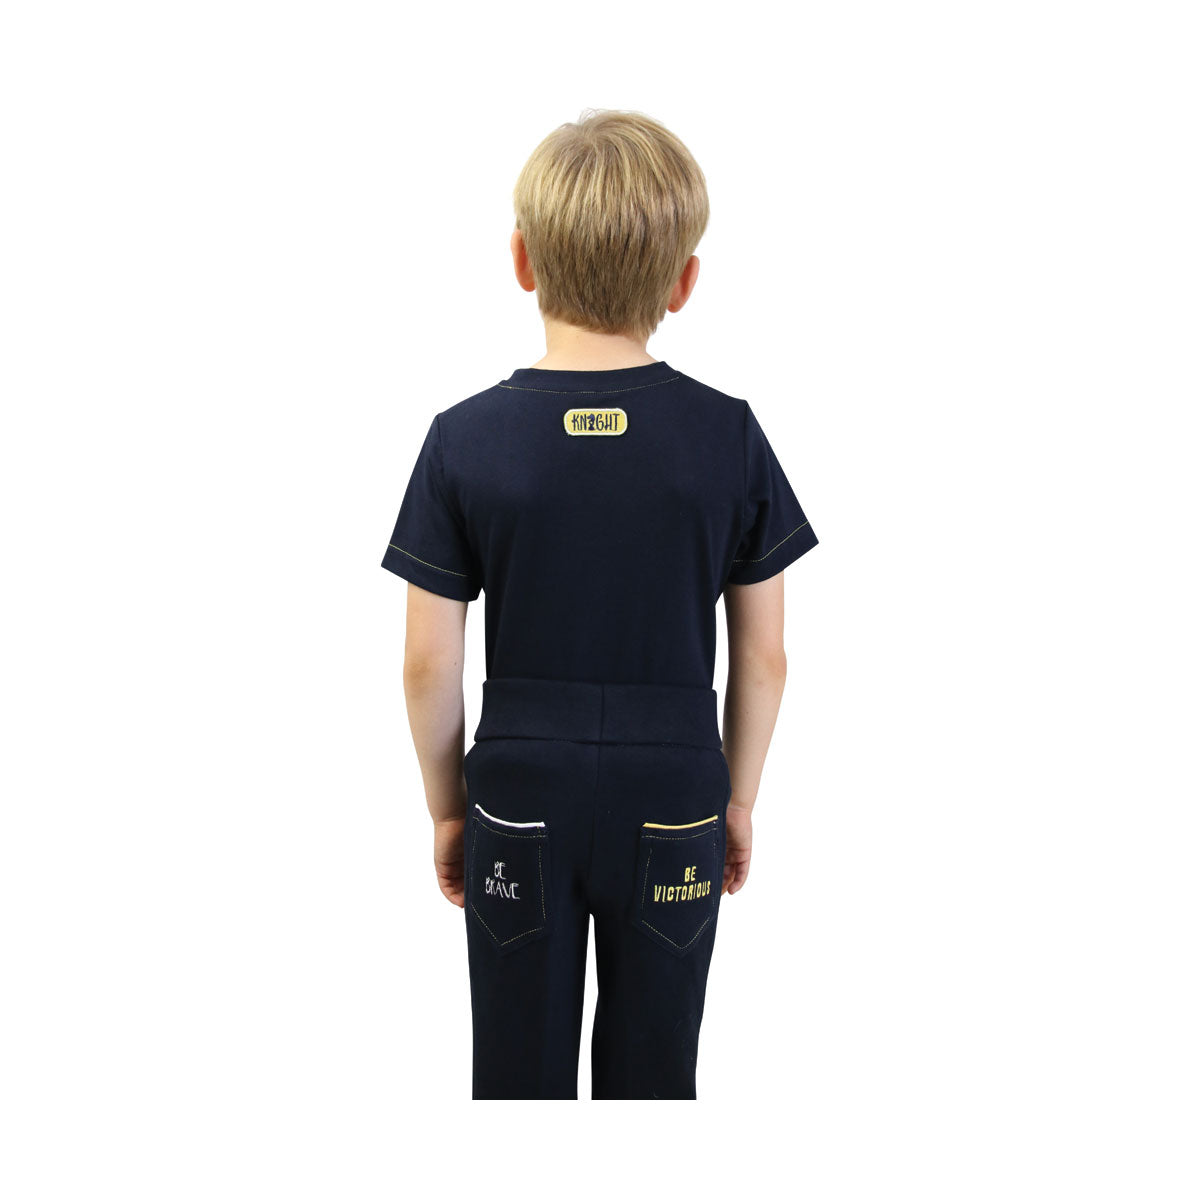 Be Brave T-Shirt by Little Knight Polo Shirts & T Shirts Barnstaple Equestrian Supplies